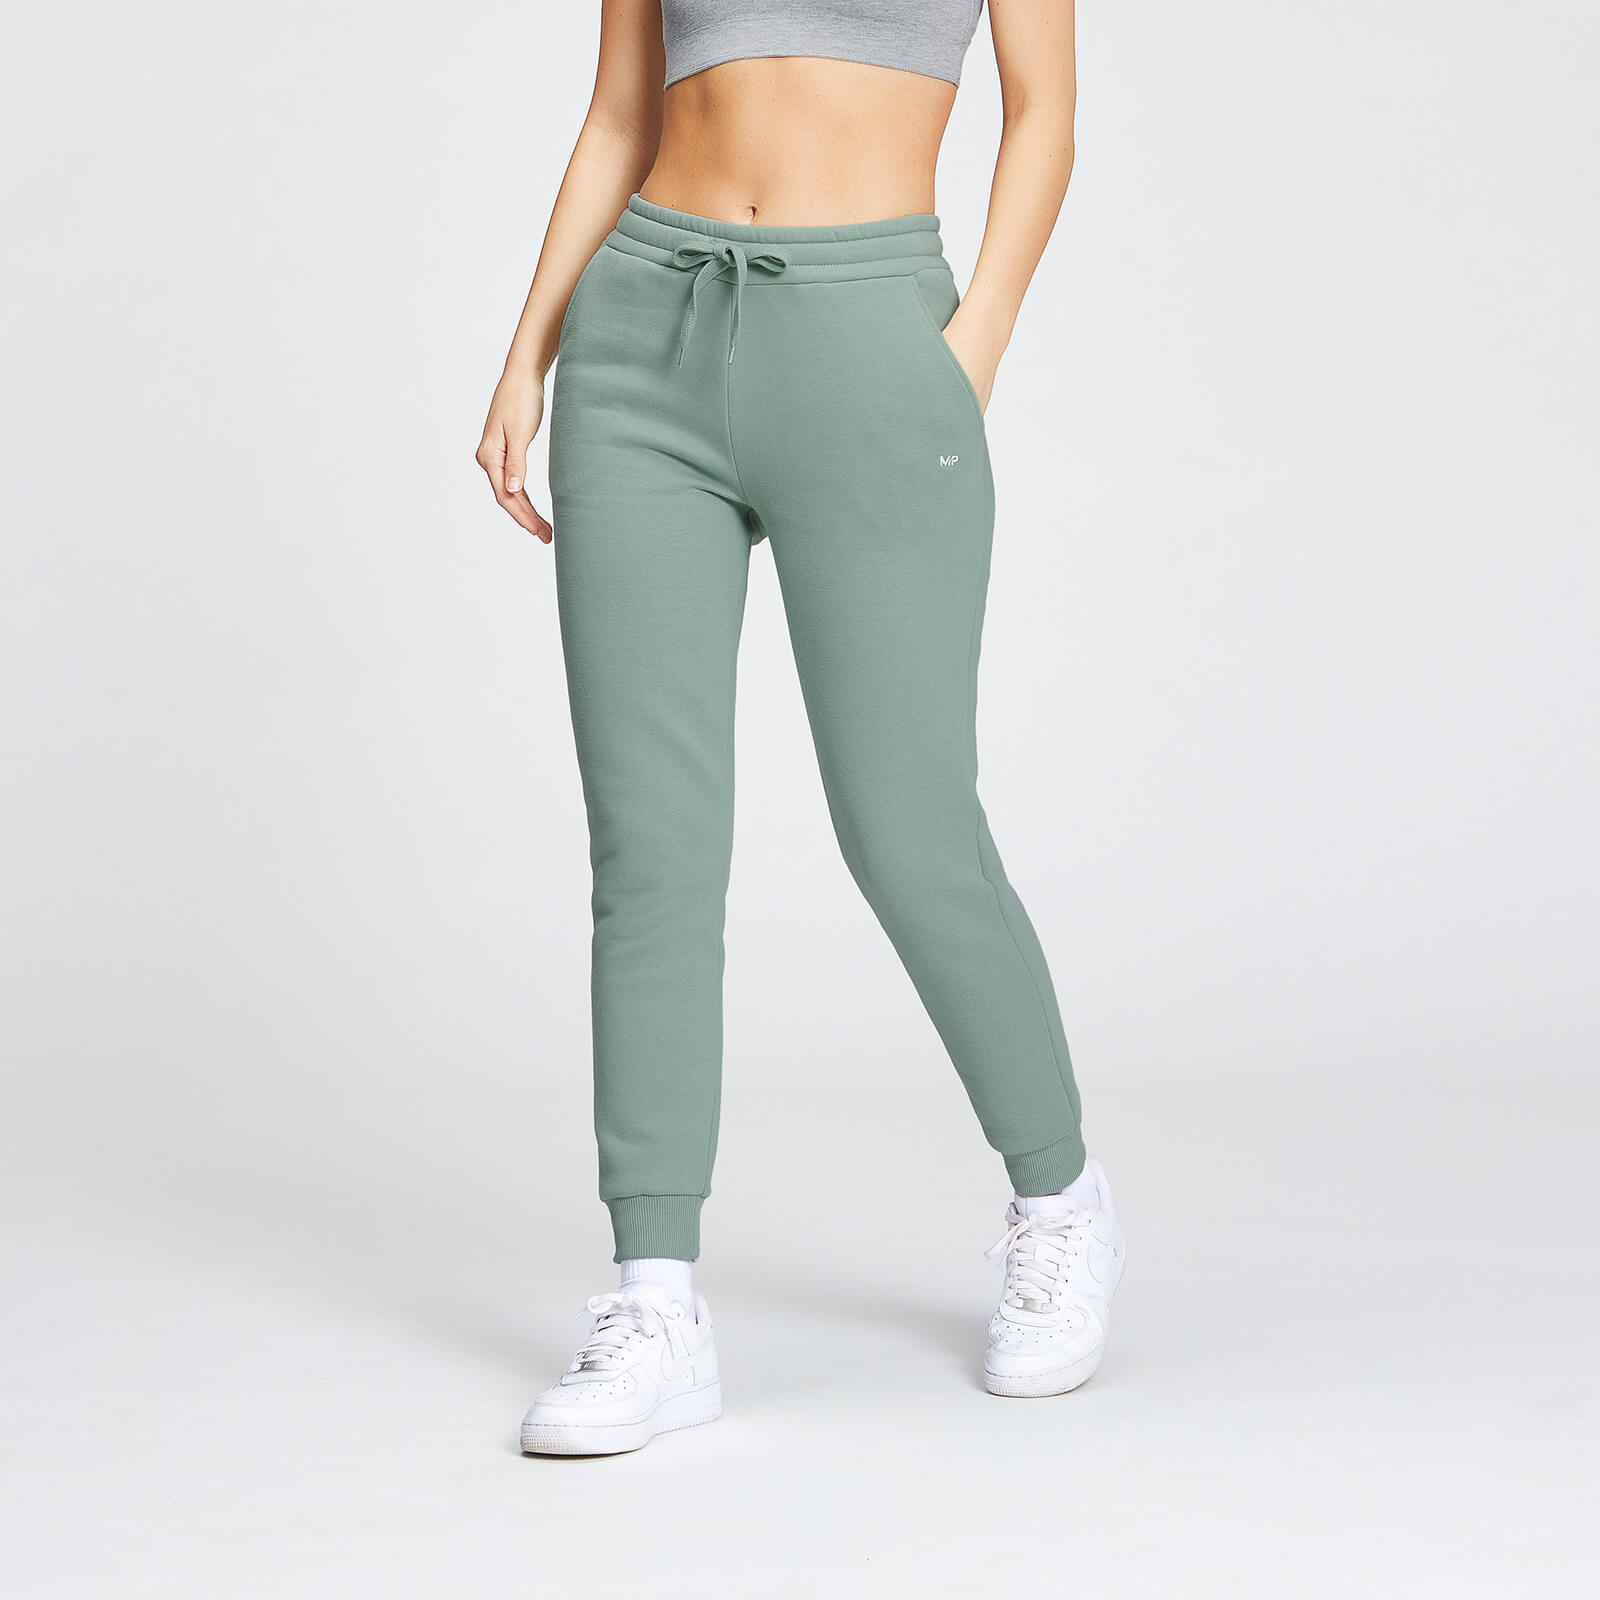 MP Women's Rest Day Joggers - Pale Green - XS